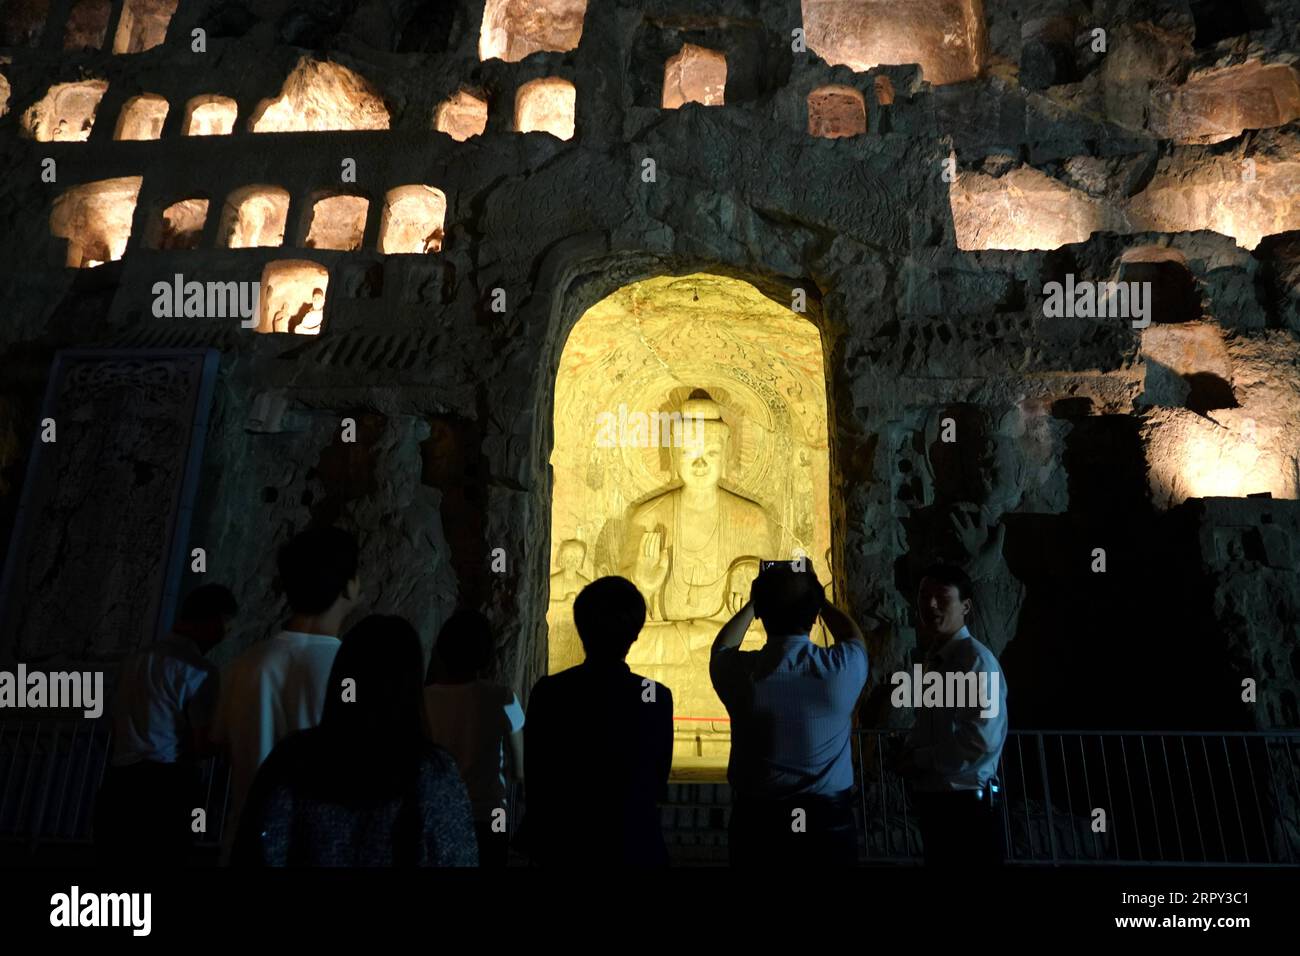 200612 -- BEIJING, June 12, 2020 -- Tourists take part in a night tour at the Longmen Grottoes scenic area in Luoyang, central China s Henan Province, June 8, 2020.  Xinhua Headlines: Night markets inject new impetus for China s recovering economy LixAn PUBLICATIONxNOTxINxCHN Stock Photo